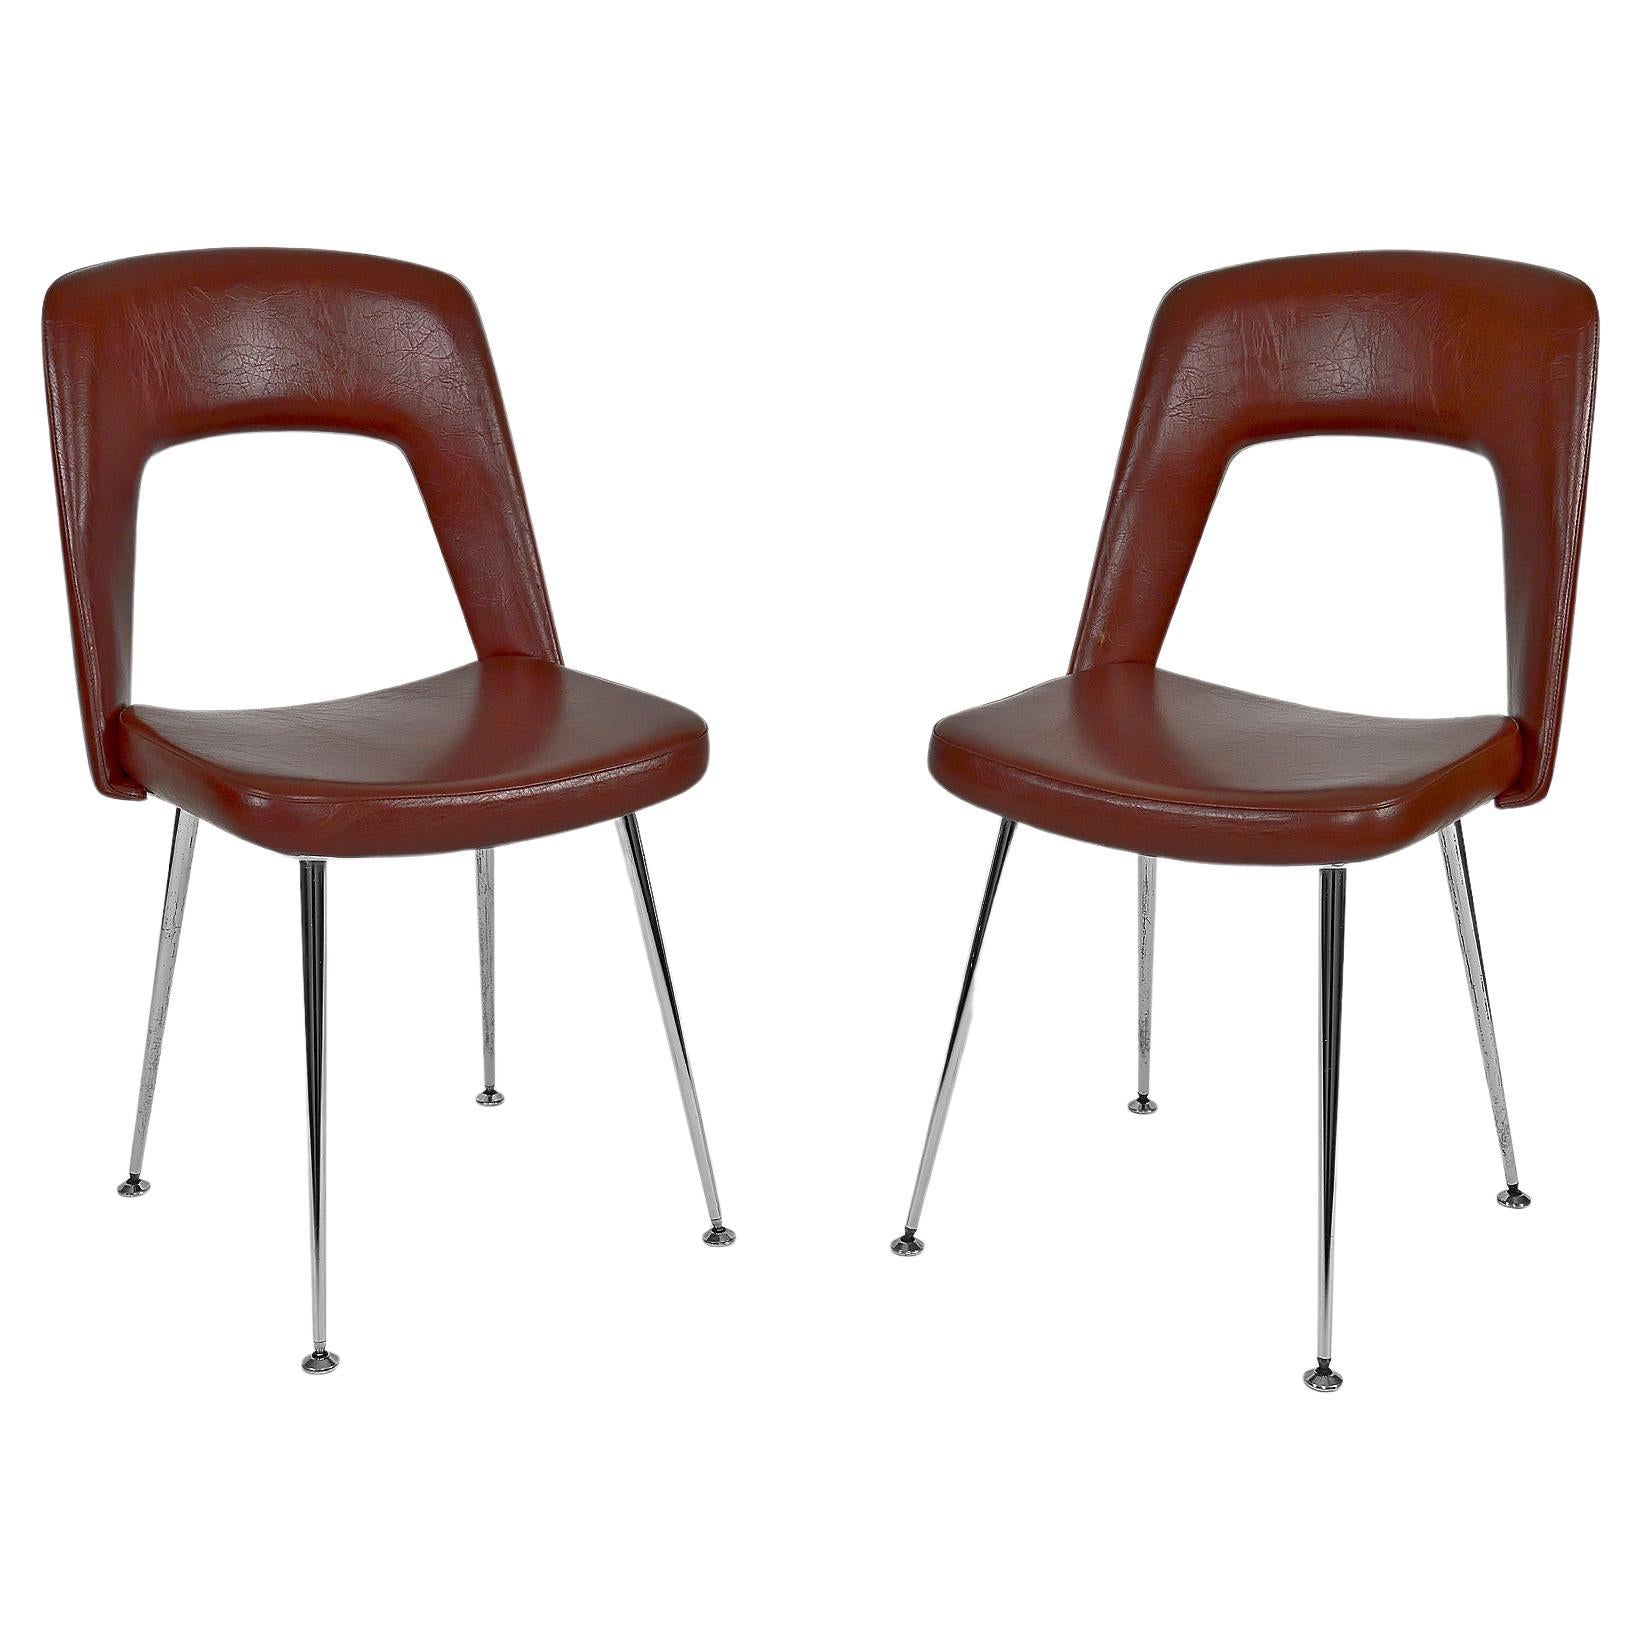 Pair of Conference Chairs in Chrome and Leatherette, circa 1960